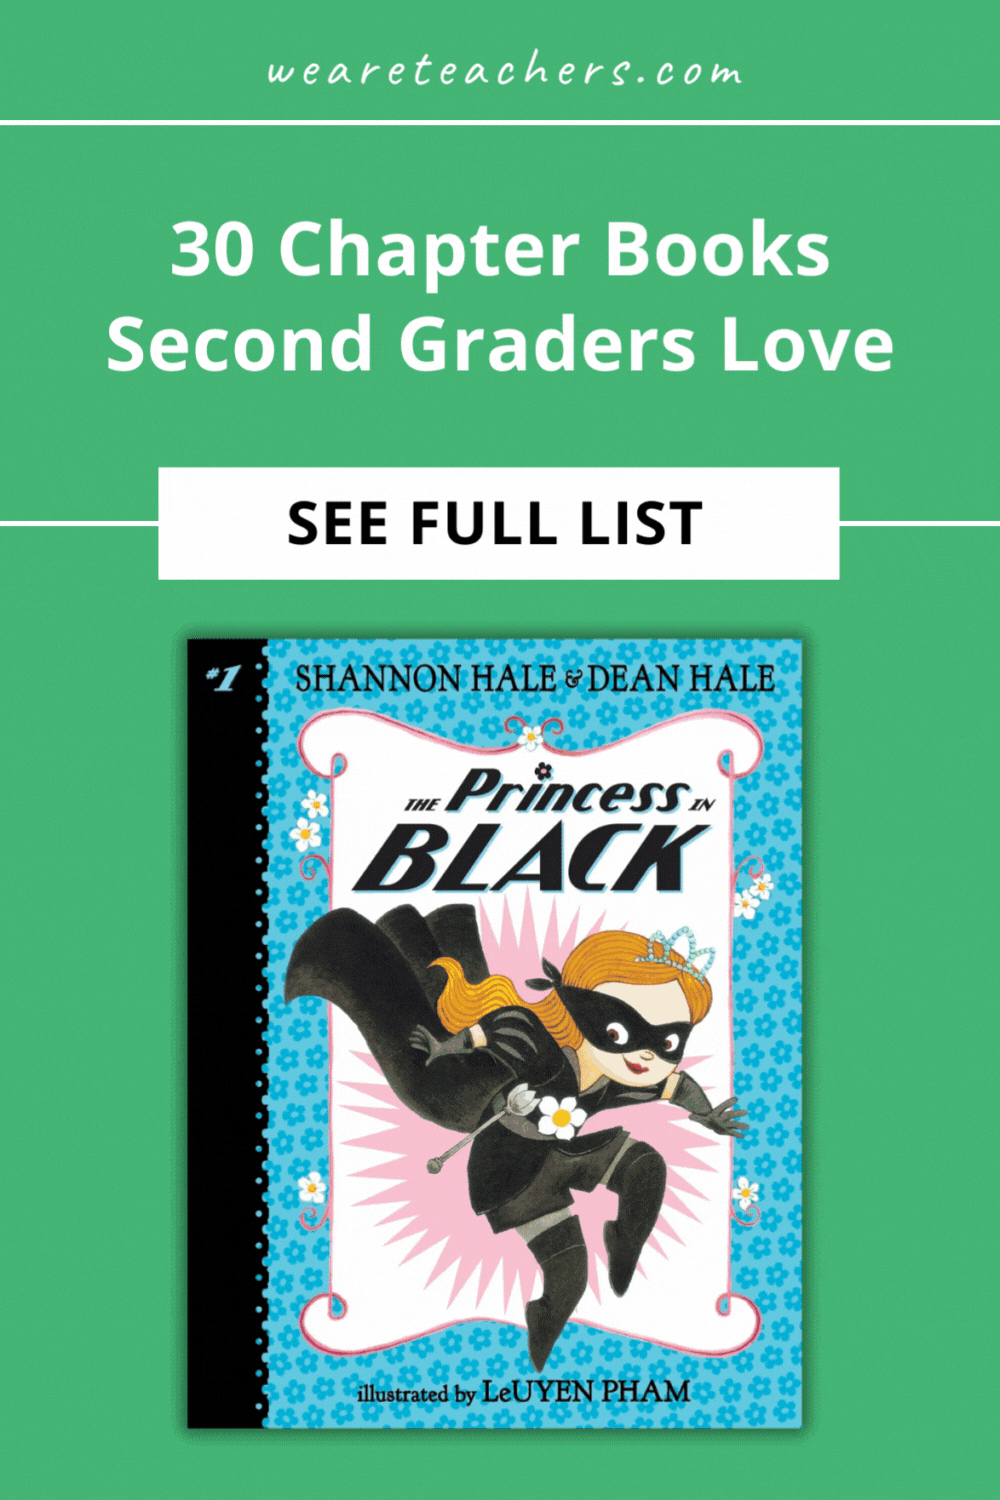 Check out this list to get your classroom hooked on our favorite chapter books for second graders no matter their interests.